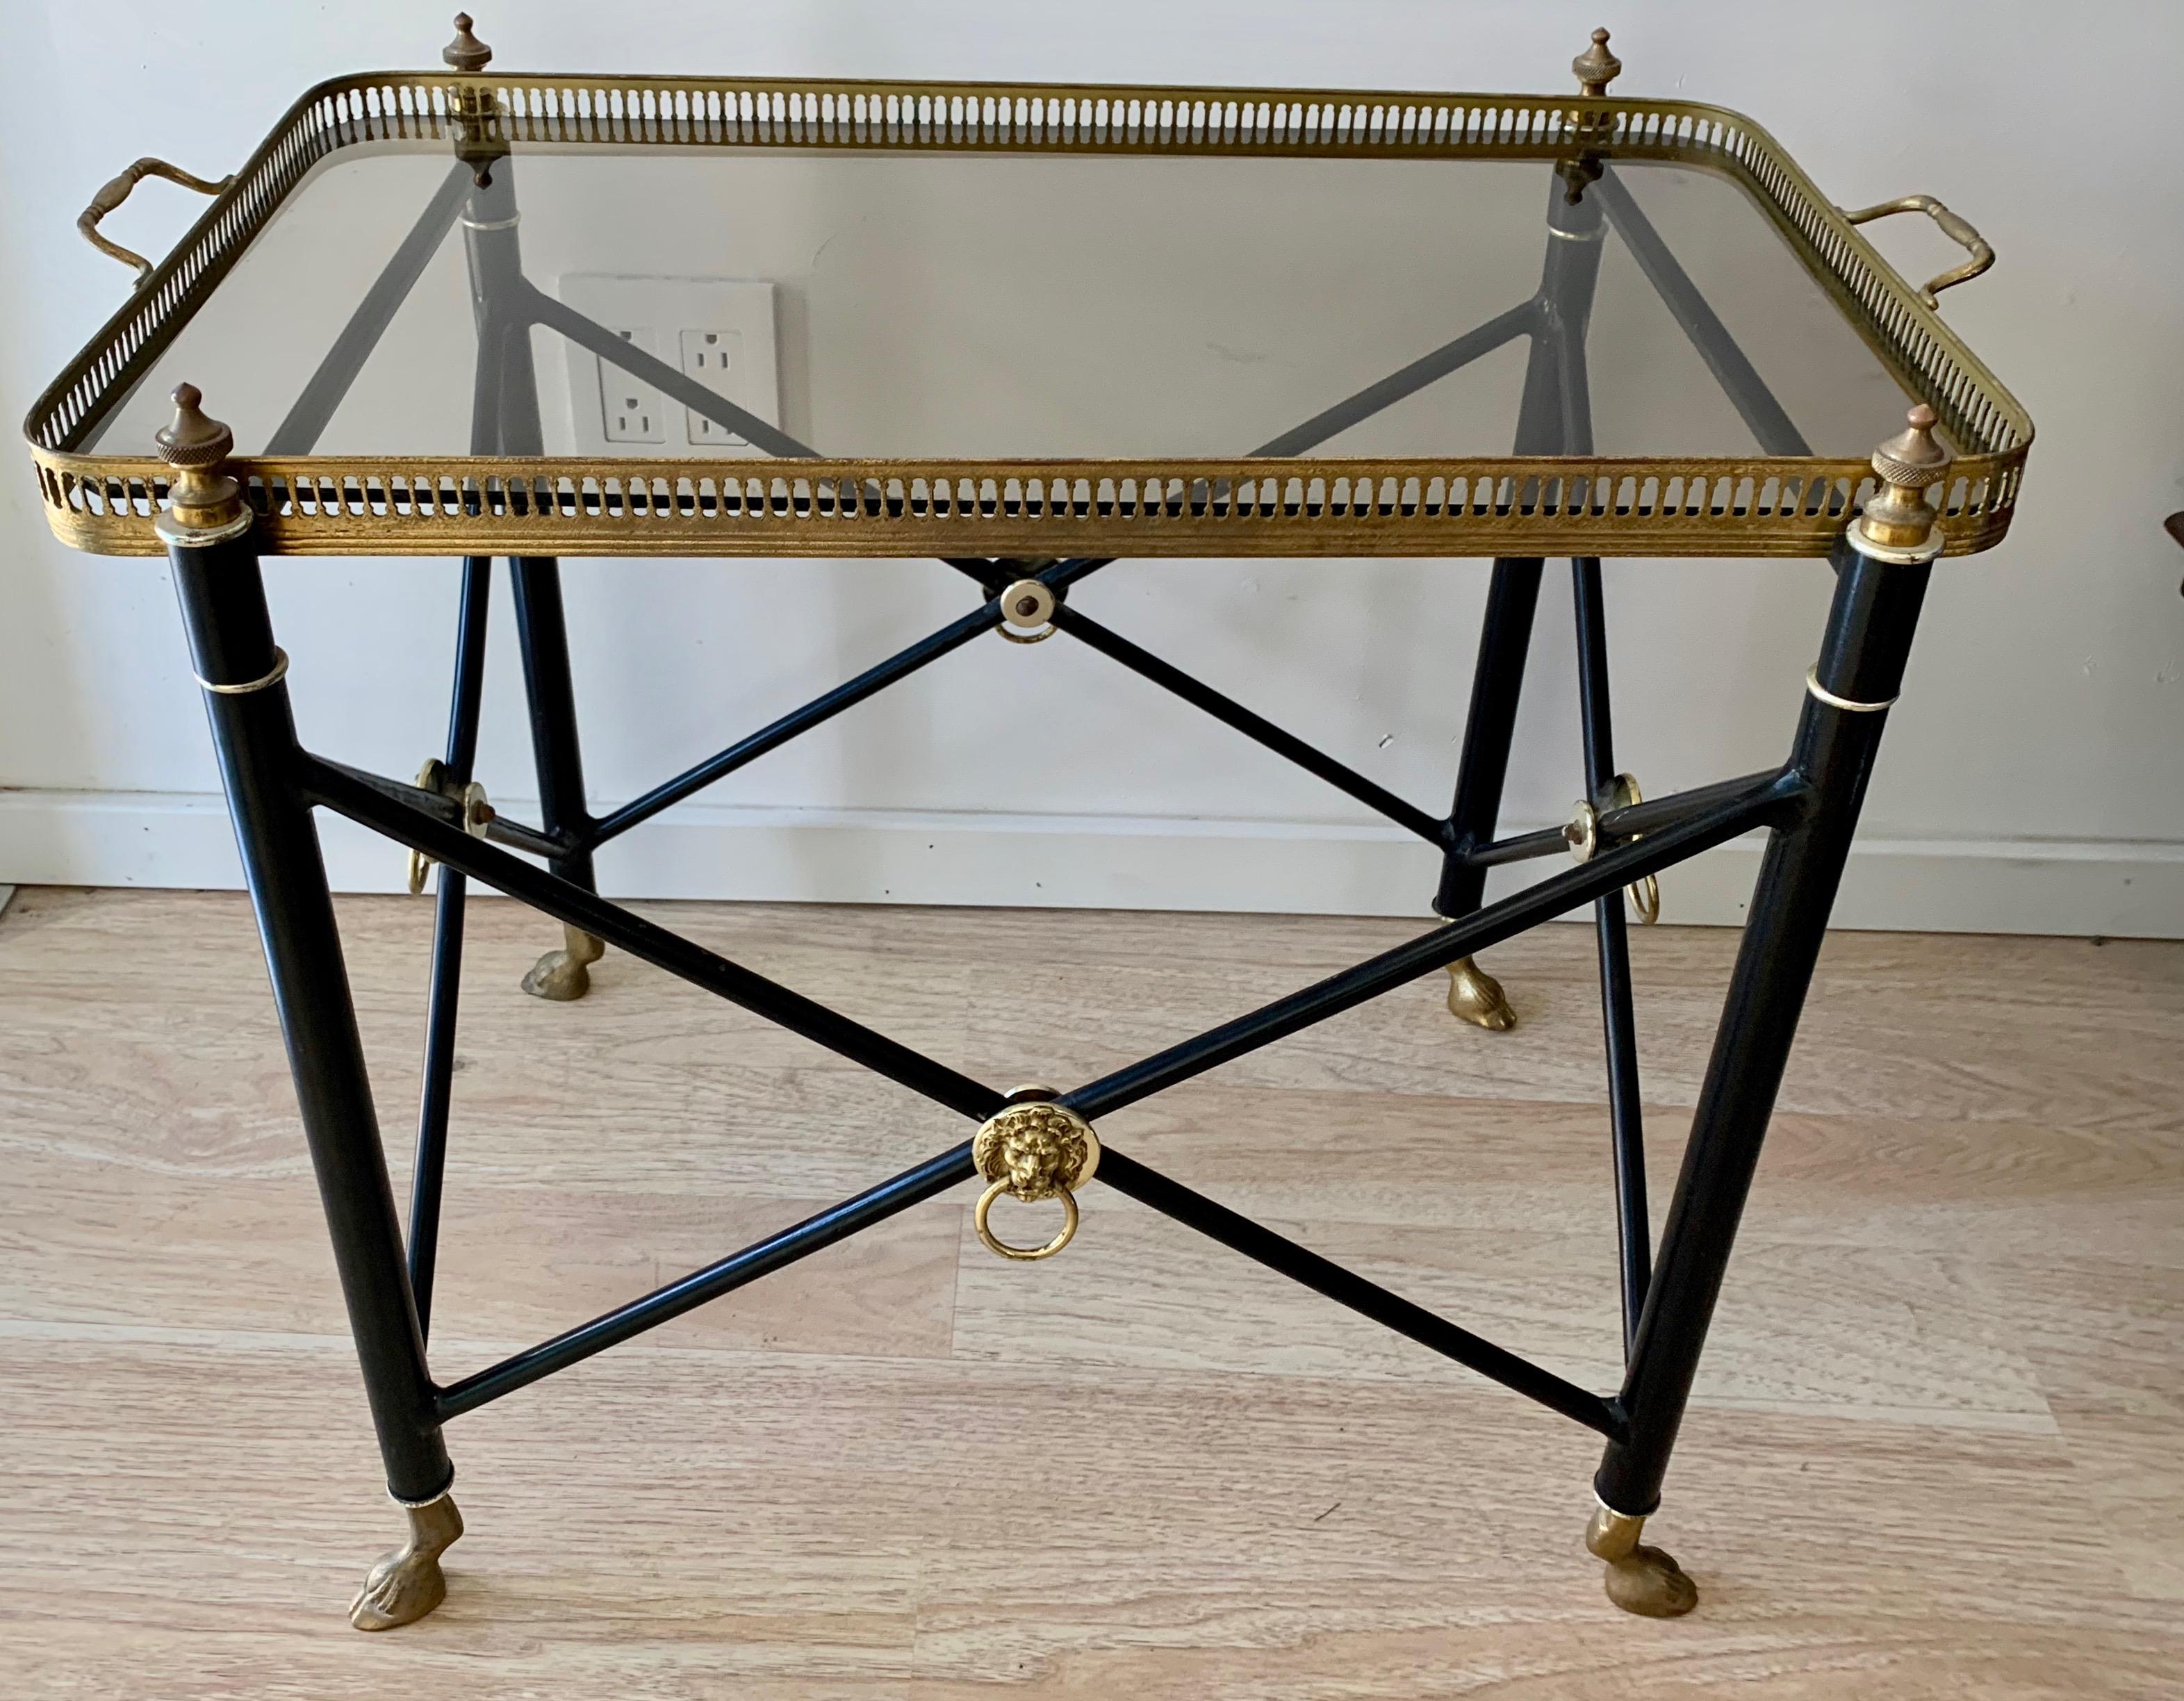 French tray table with smoked glass tray and lion detailing, with brass hoof feet - a wonderful table with removable tray - a handsome cocktail, side or serving / TV table.

Very functional and stylish for any room, from bedroom to fine living room